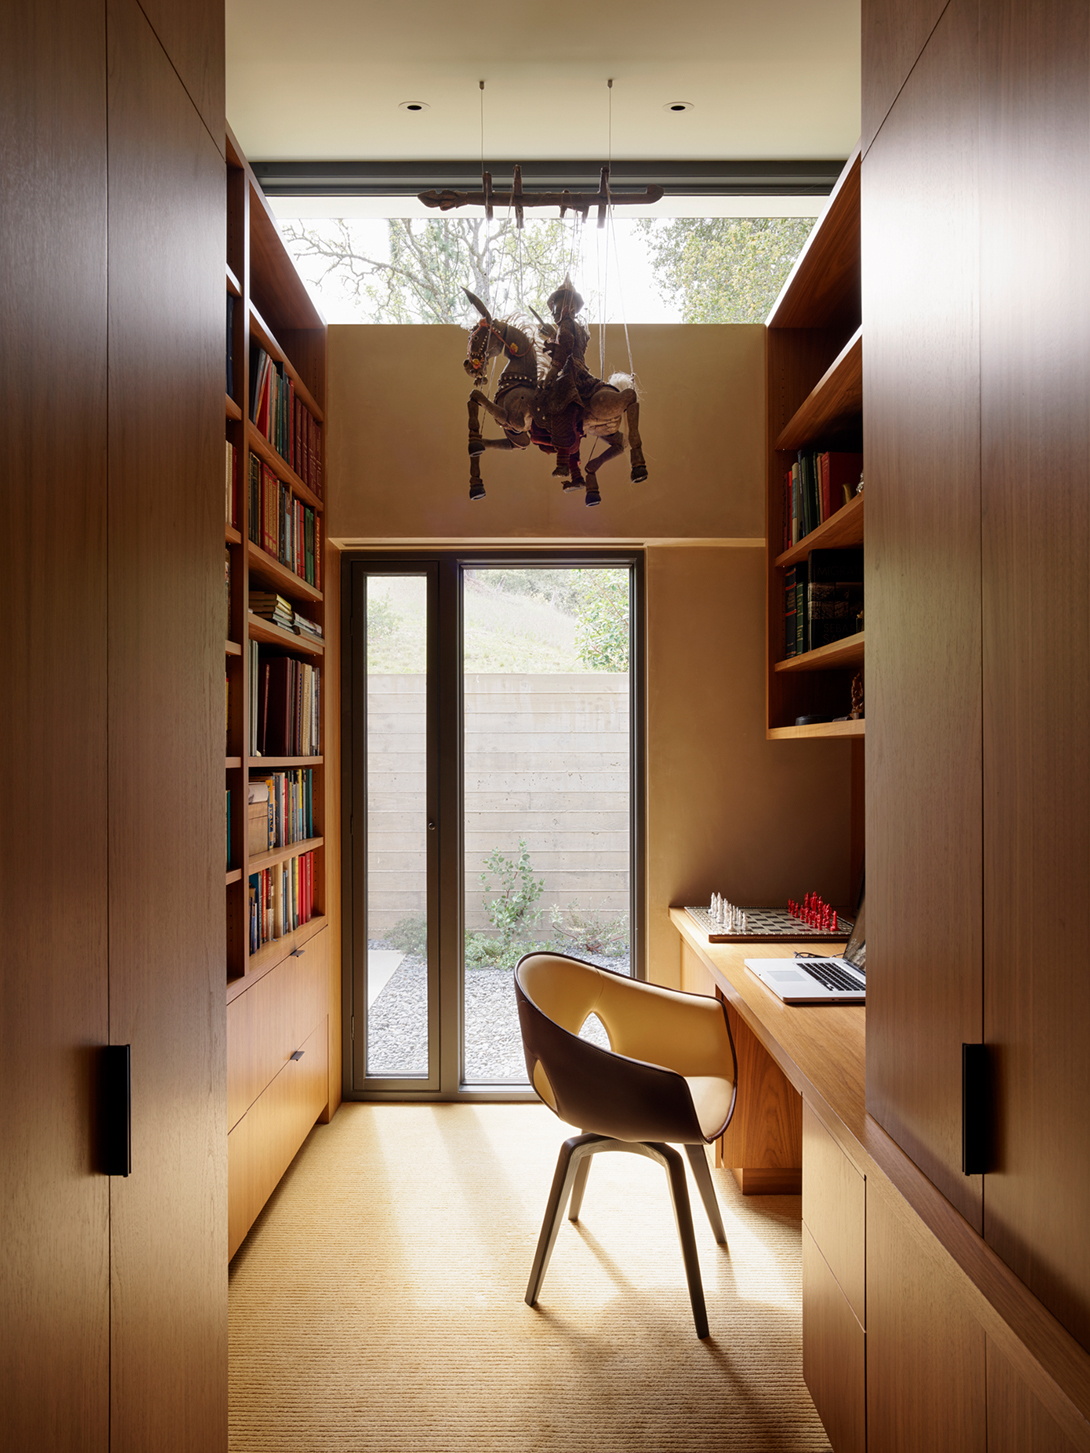 The clients, Marilyn Rosenwein and Howard Cohen, each have their own dressing room/study in the house